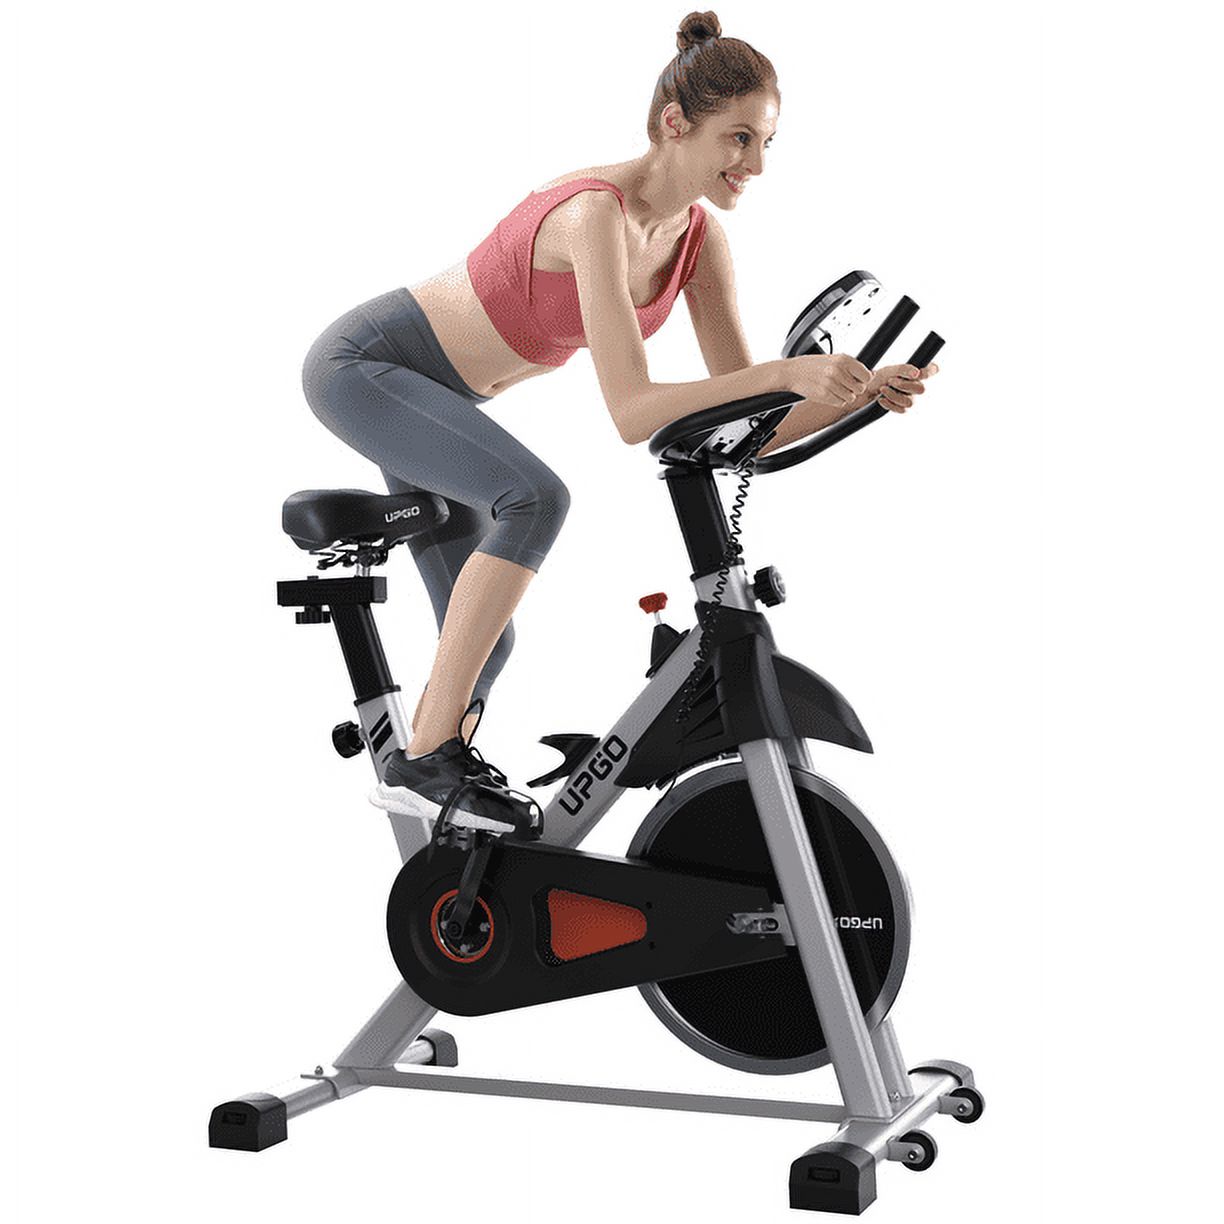 UPGO Indoor Cycling Bike Stationary Bike with 270lb Max Weight Exercise Bicycle with Ipad Mount & Comfortable Seat Cushion for Home Cardio Workout - image 1 of 11